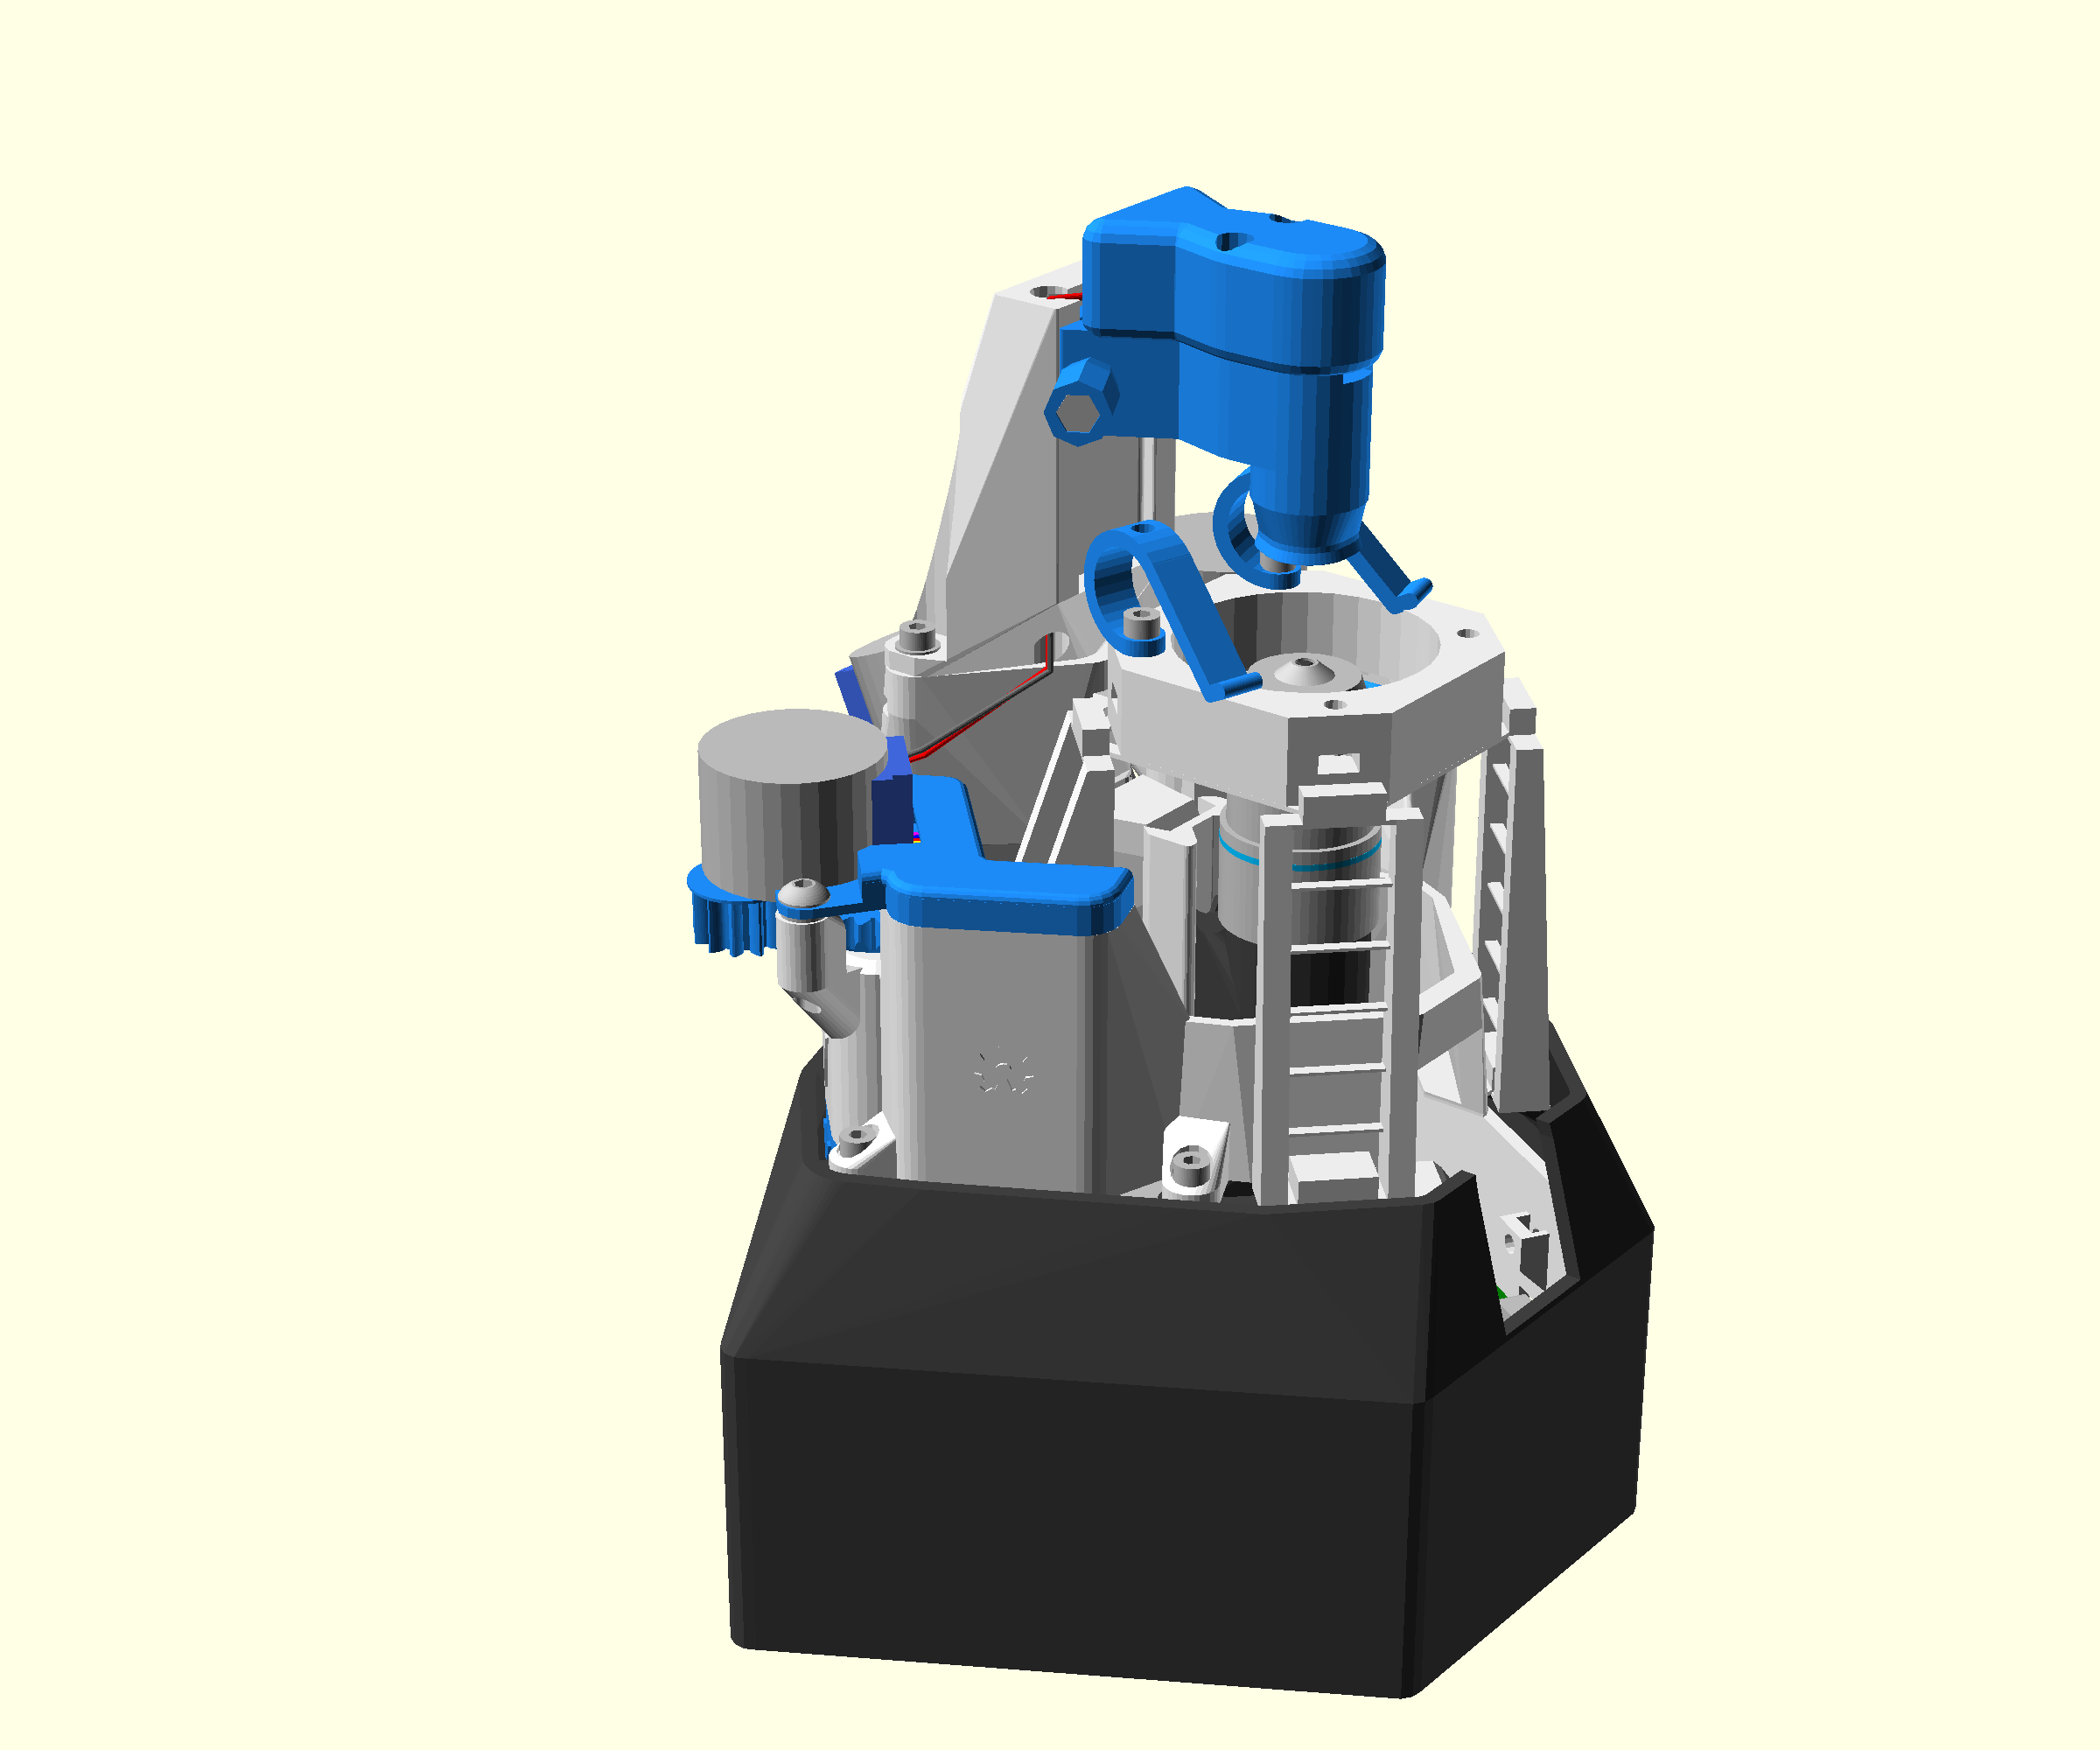 A render of the completed high resolution microscope